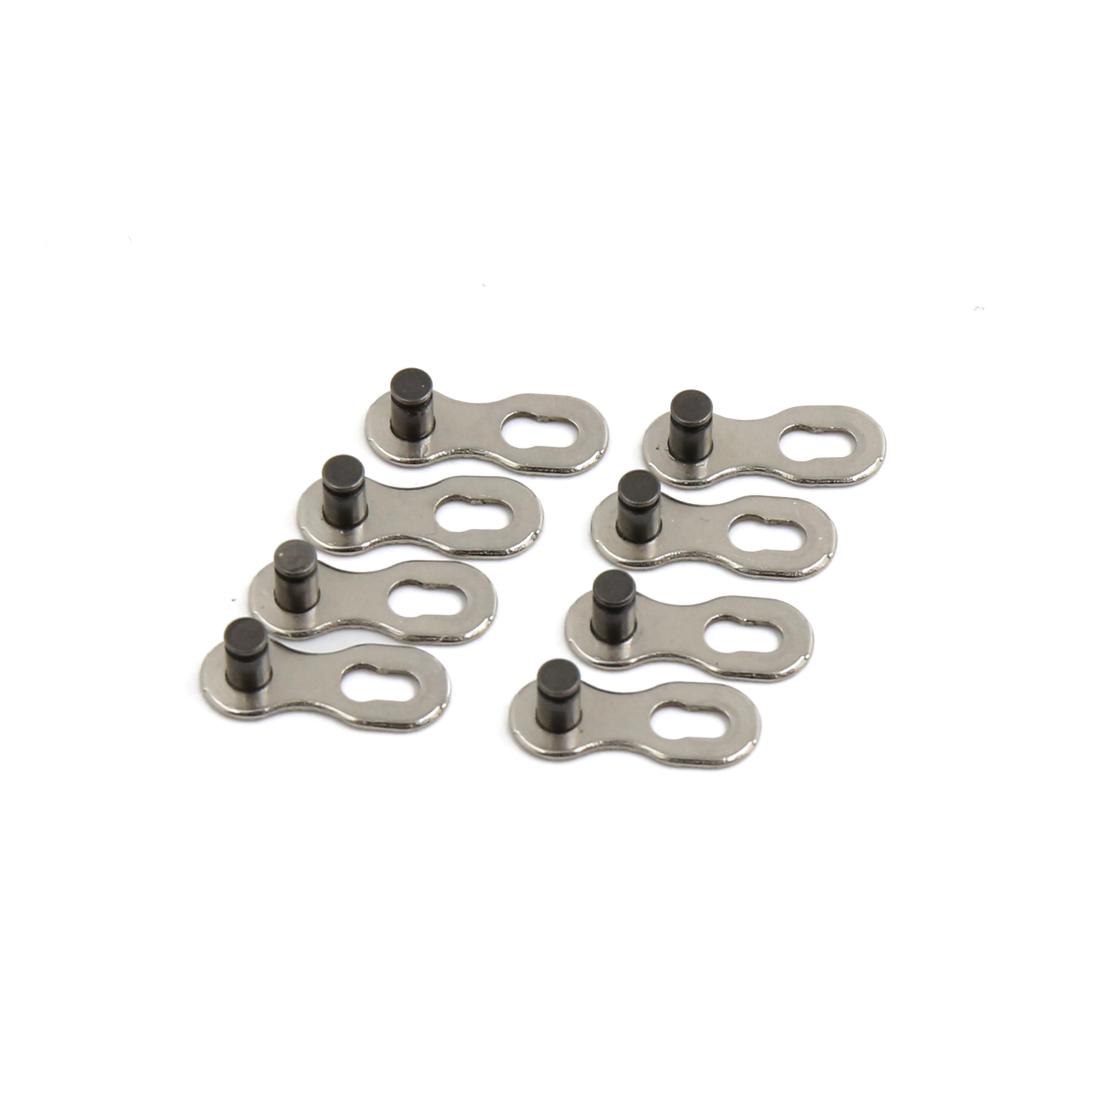 Unique Bargains 4 Pair 10 Speed Chain Quick Master Link Buckle Connector for Bicycle Cycling - image 1 of 2